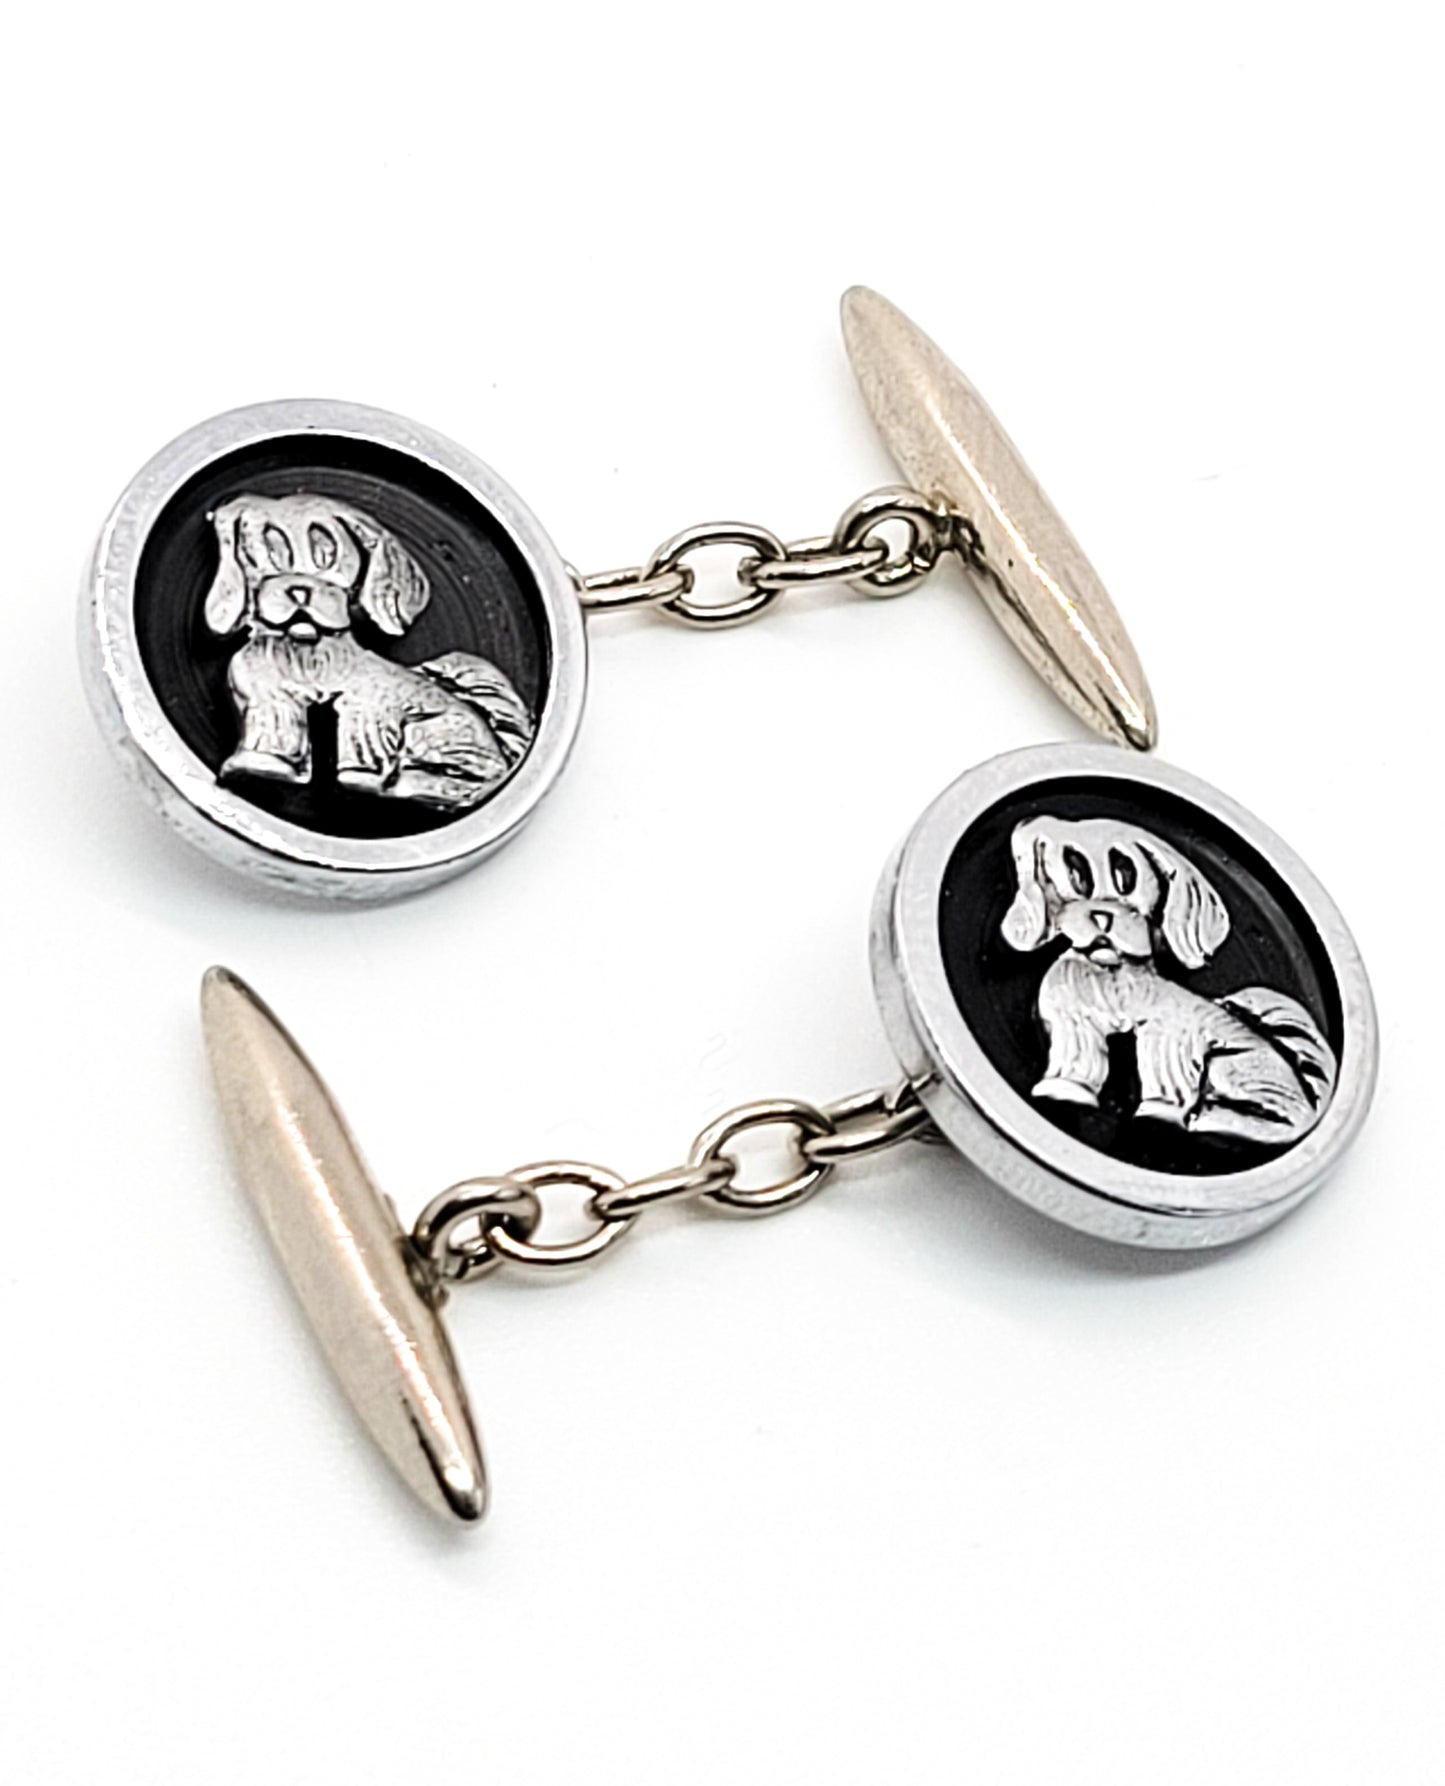 Hound dog puppy vintage black and silver toned vintage chain cuff links